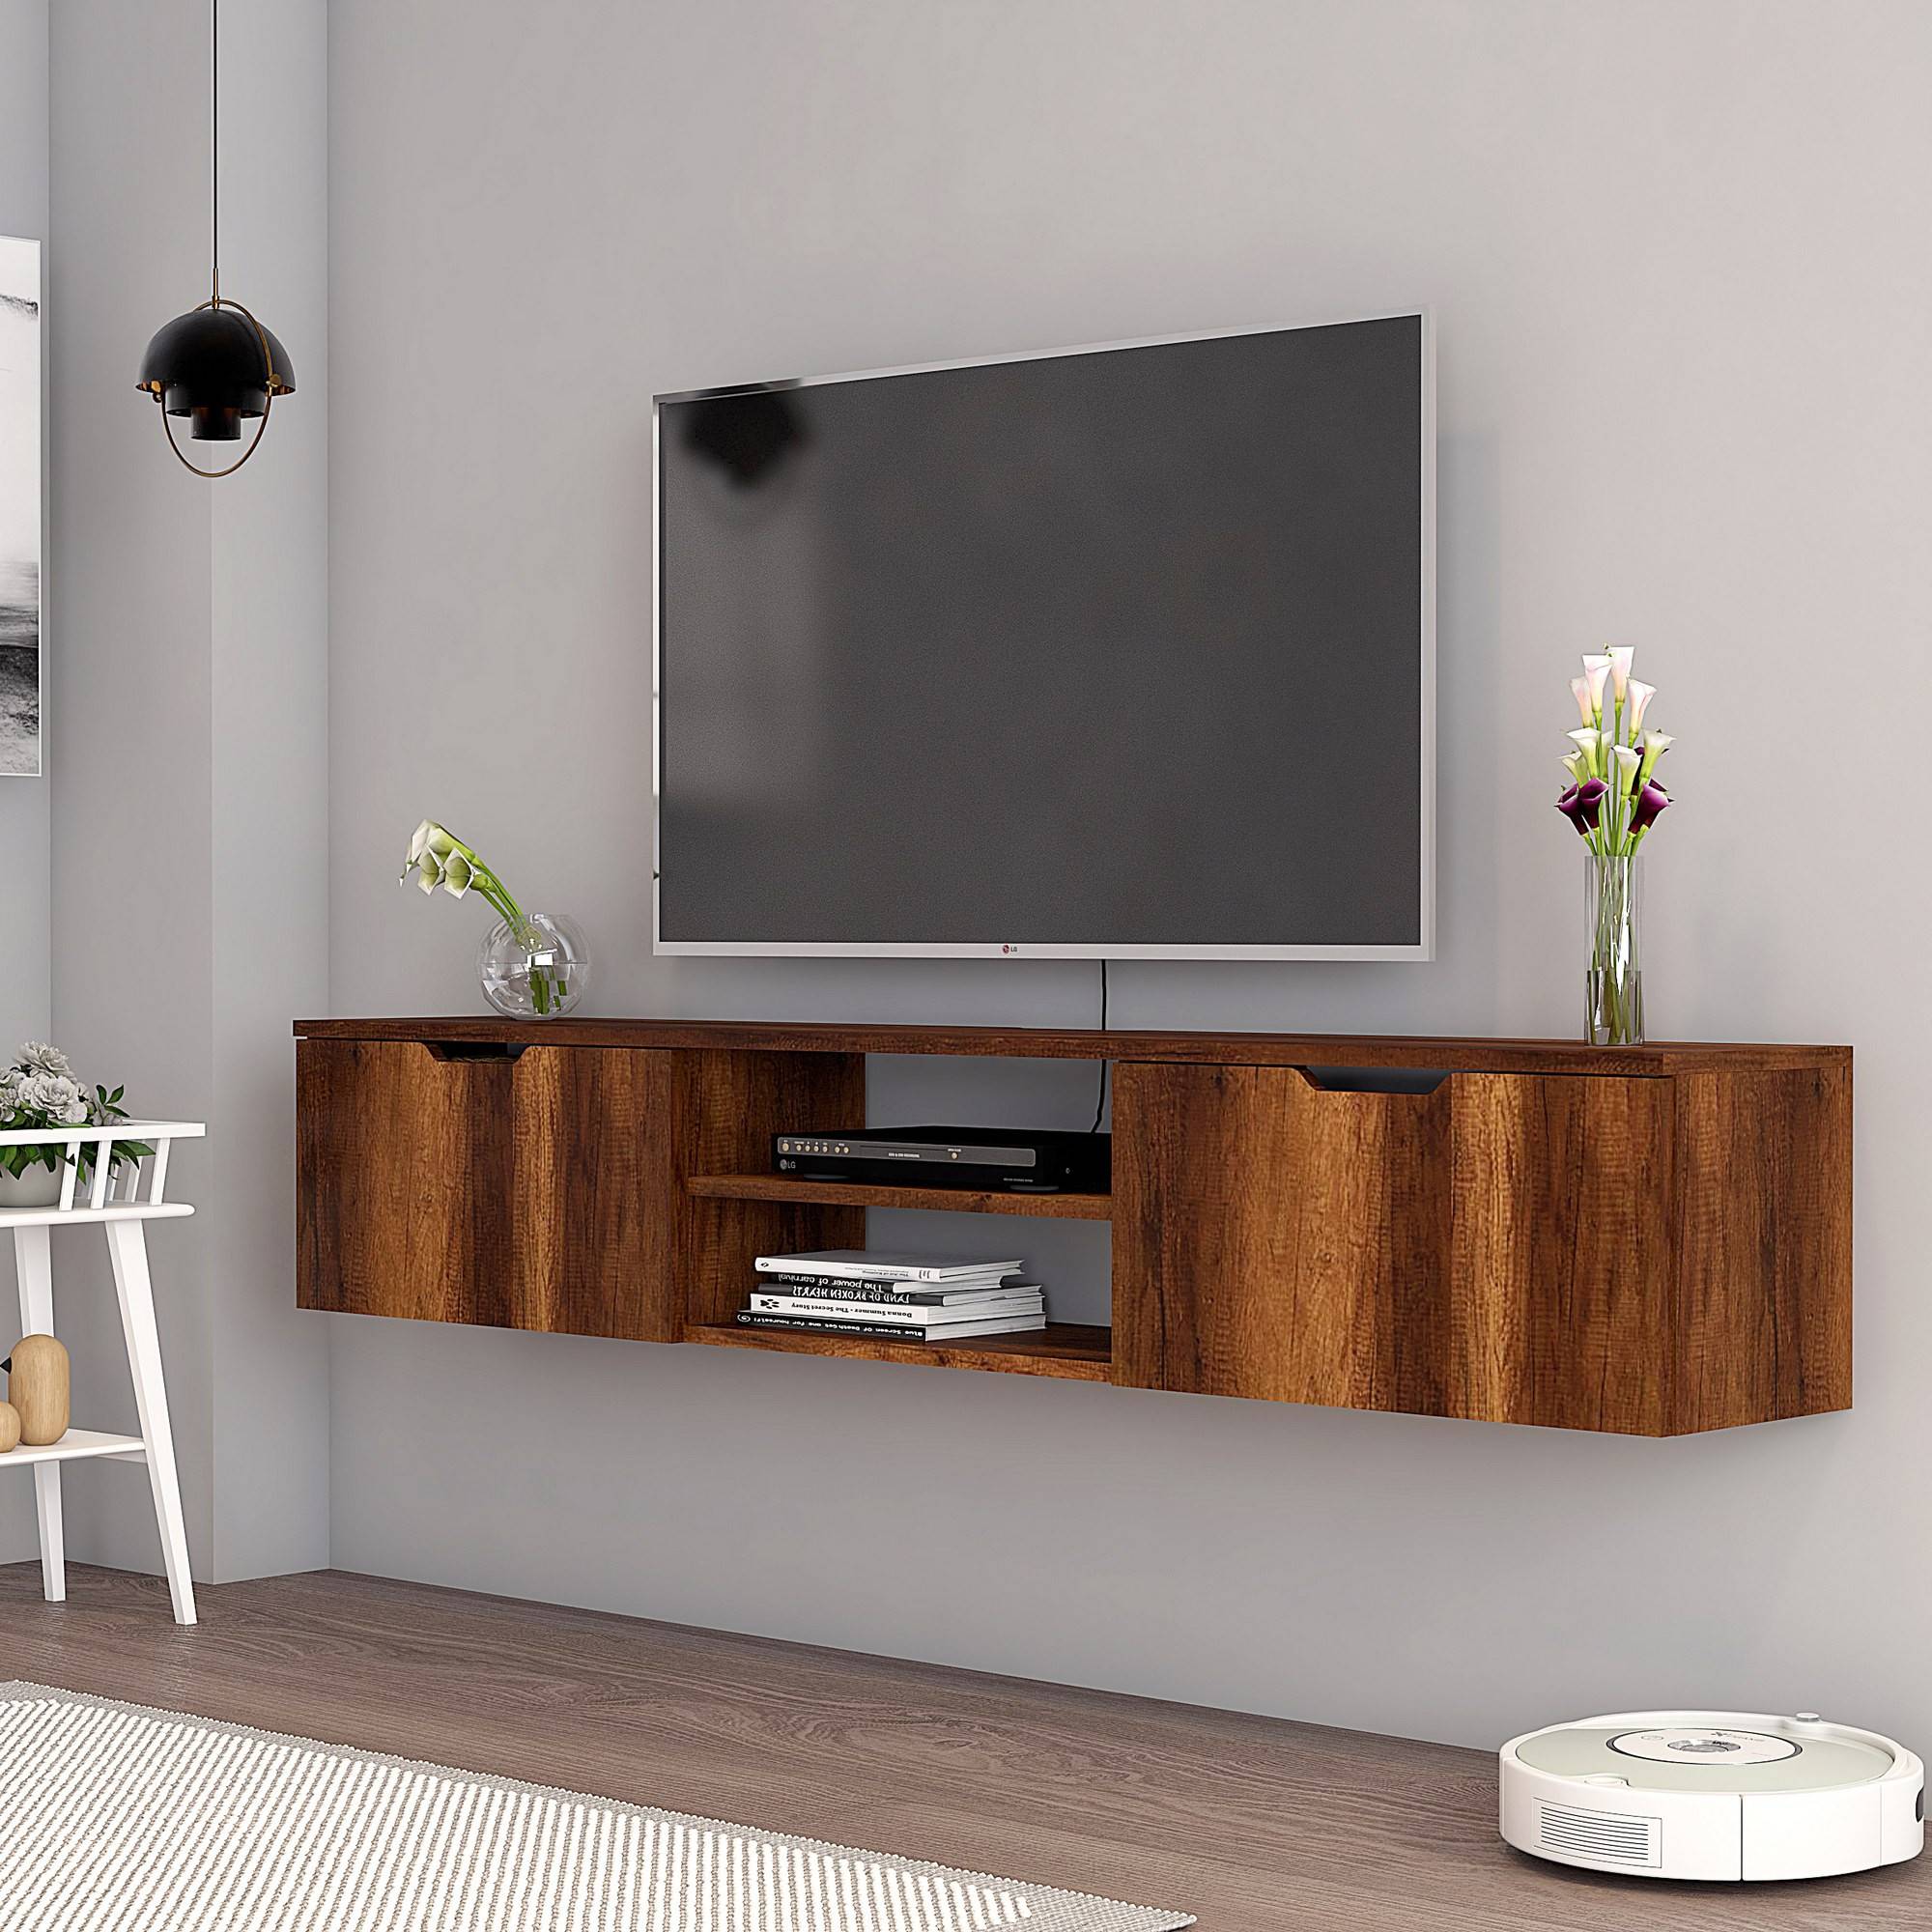 Isaiah Wand TV-meubel L160cm Donker hout